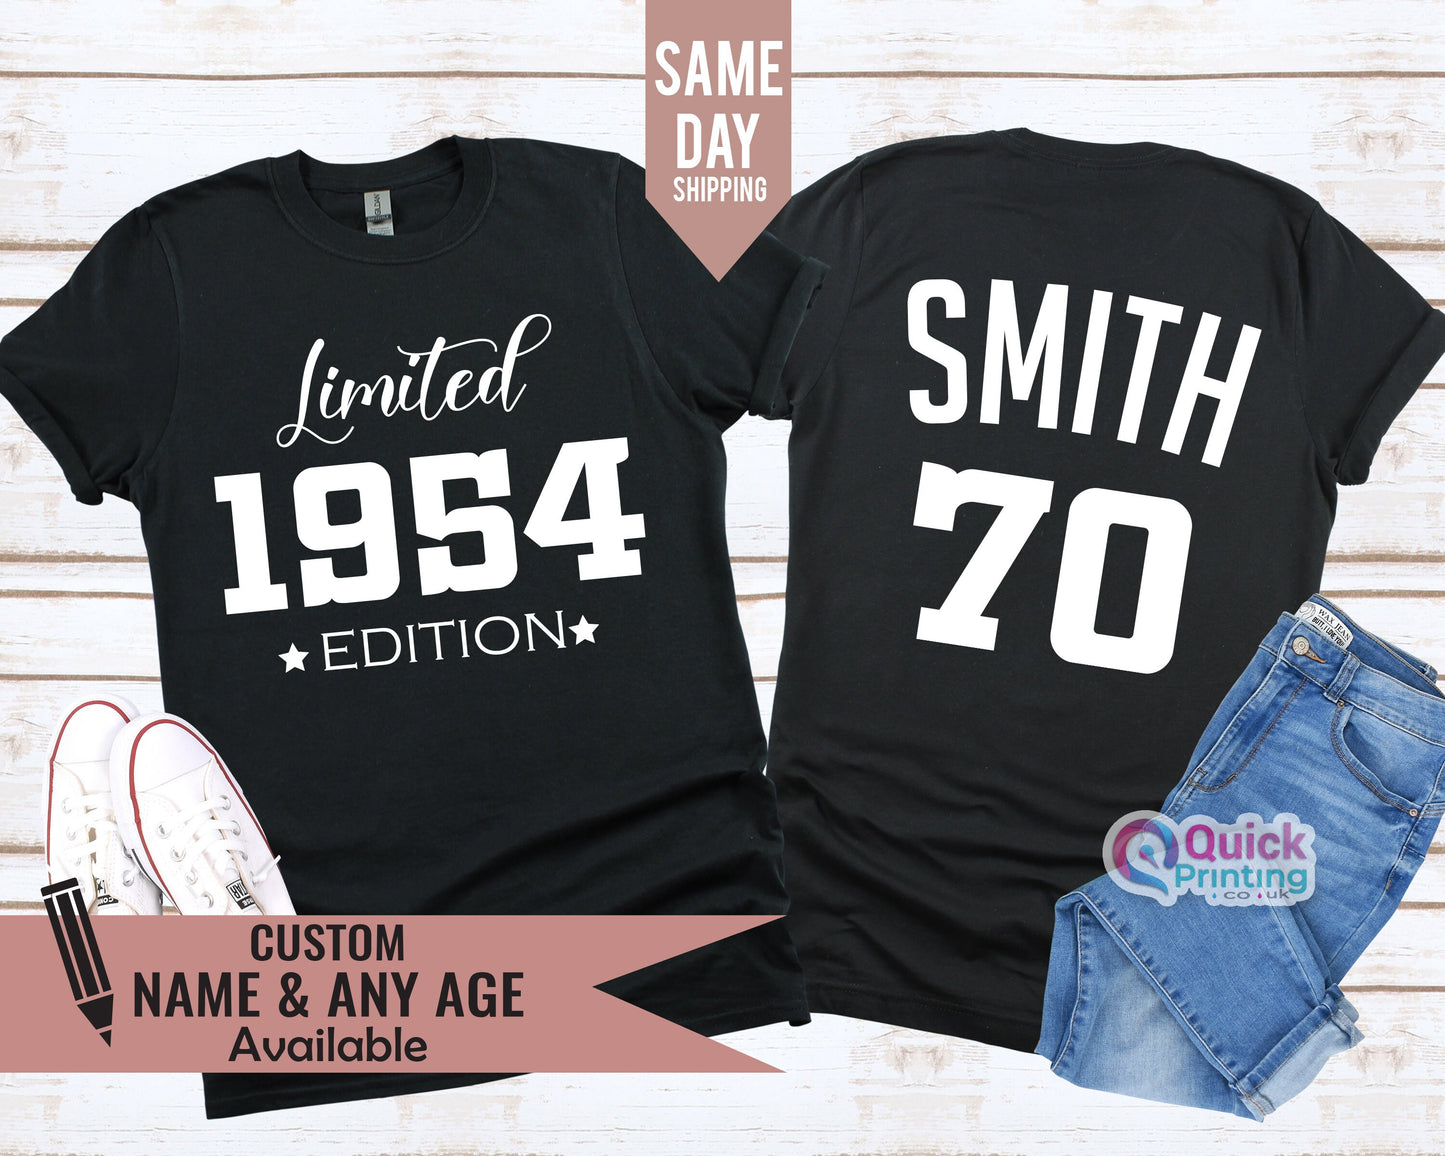 limited Edition 1954 Tshirt, 70th Birthday Gift for men, Personalised Birthday Vintage Tshirt, 70th Birthday Gift for Dad, Xmas gift for him